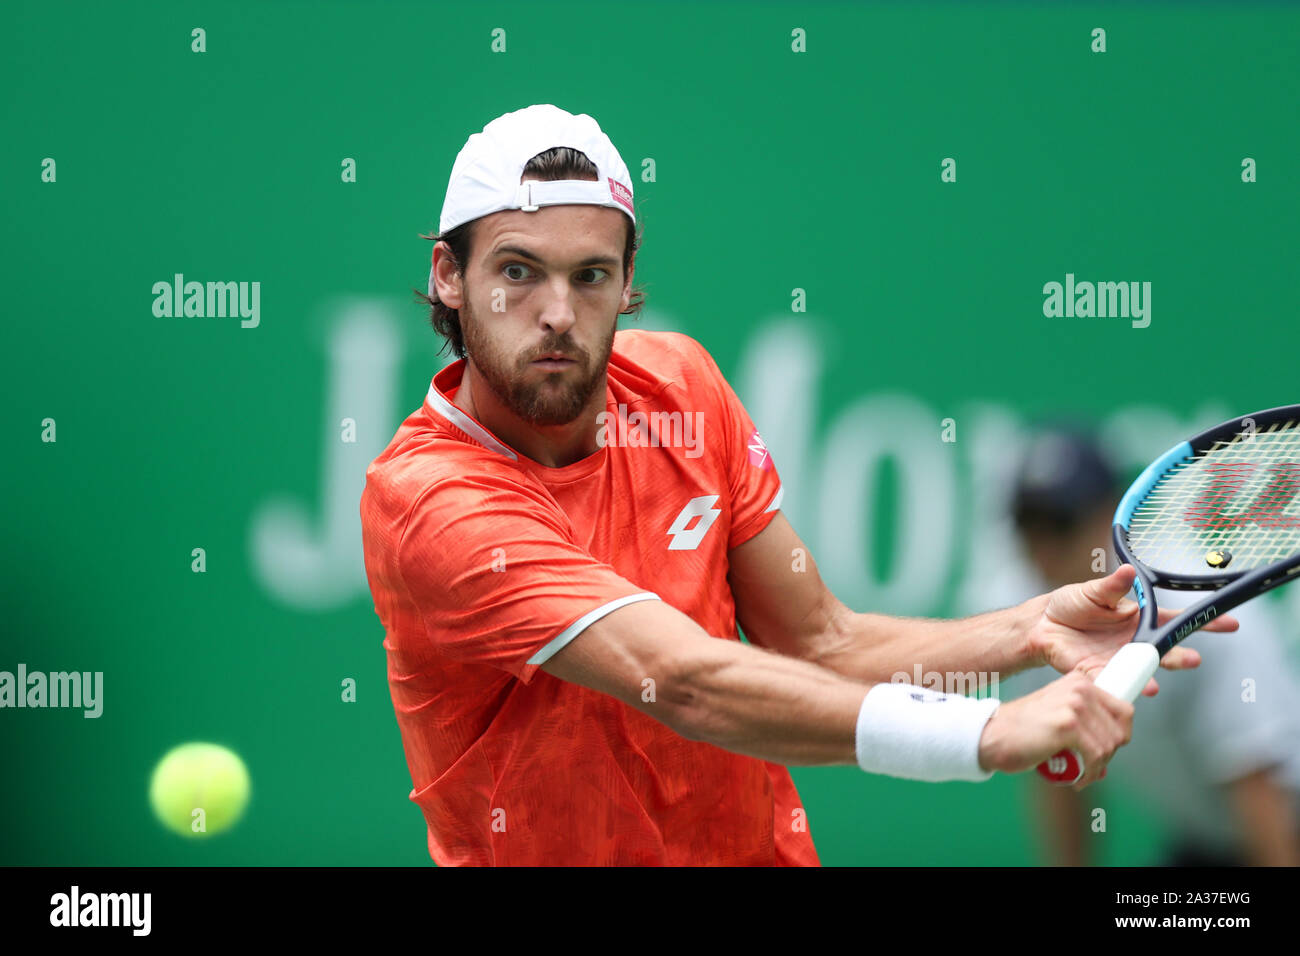 Shanghai, China. 6th Oct, 2019. Joao Sousa of Portugal hits a return during  the men's singles first round match against Filip Krajinovic of Serbia at  2019 ATP Shanghai Masters tennis tournament in